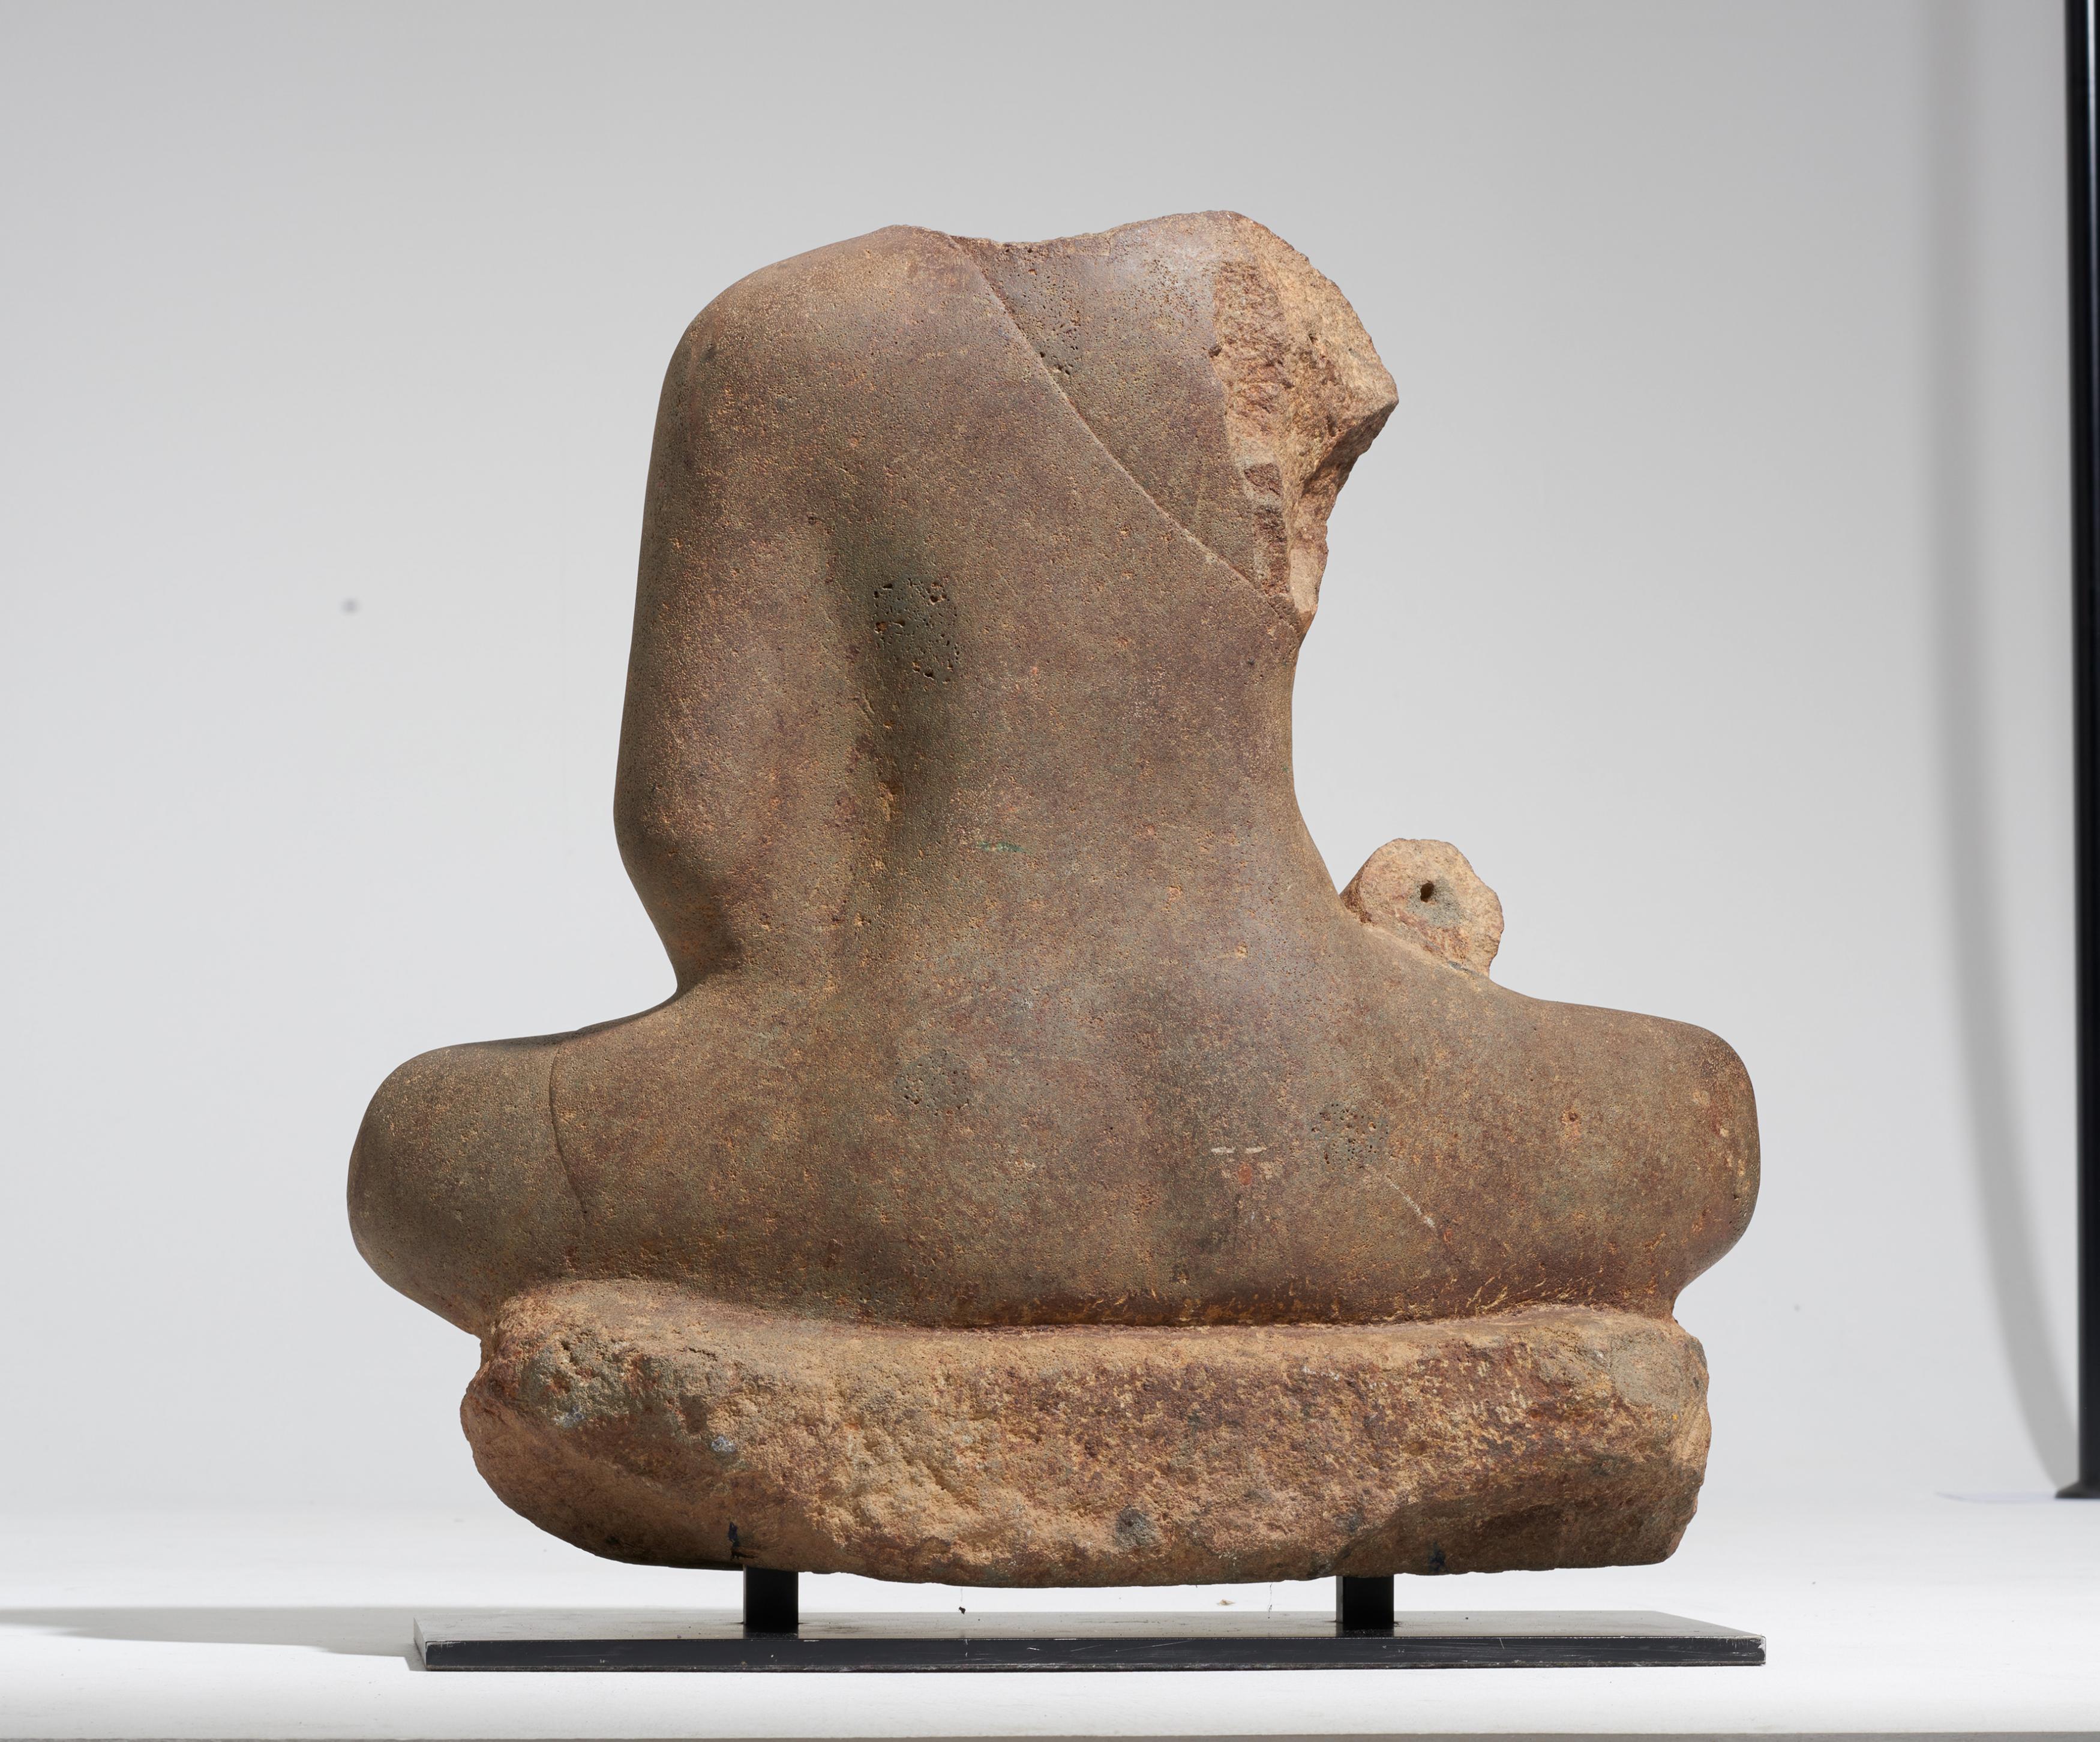 IMPORTANT BUDDHA IN MEDITATION. Origin: Khmer. Dynasty: Pre-Angkor period (100-900). Date: Late - Image 2 of 2